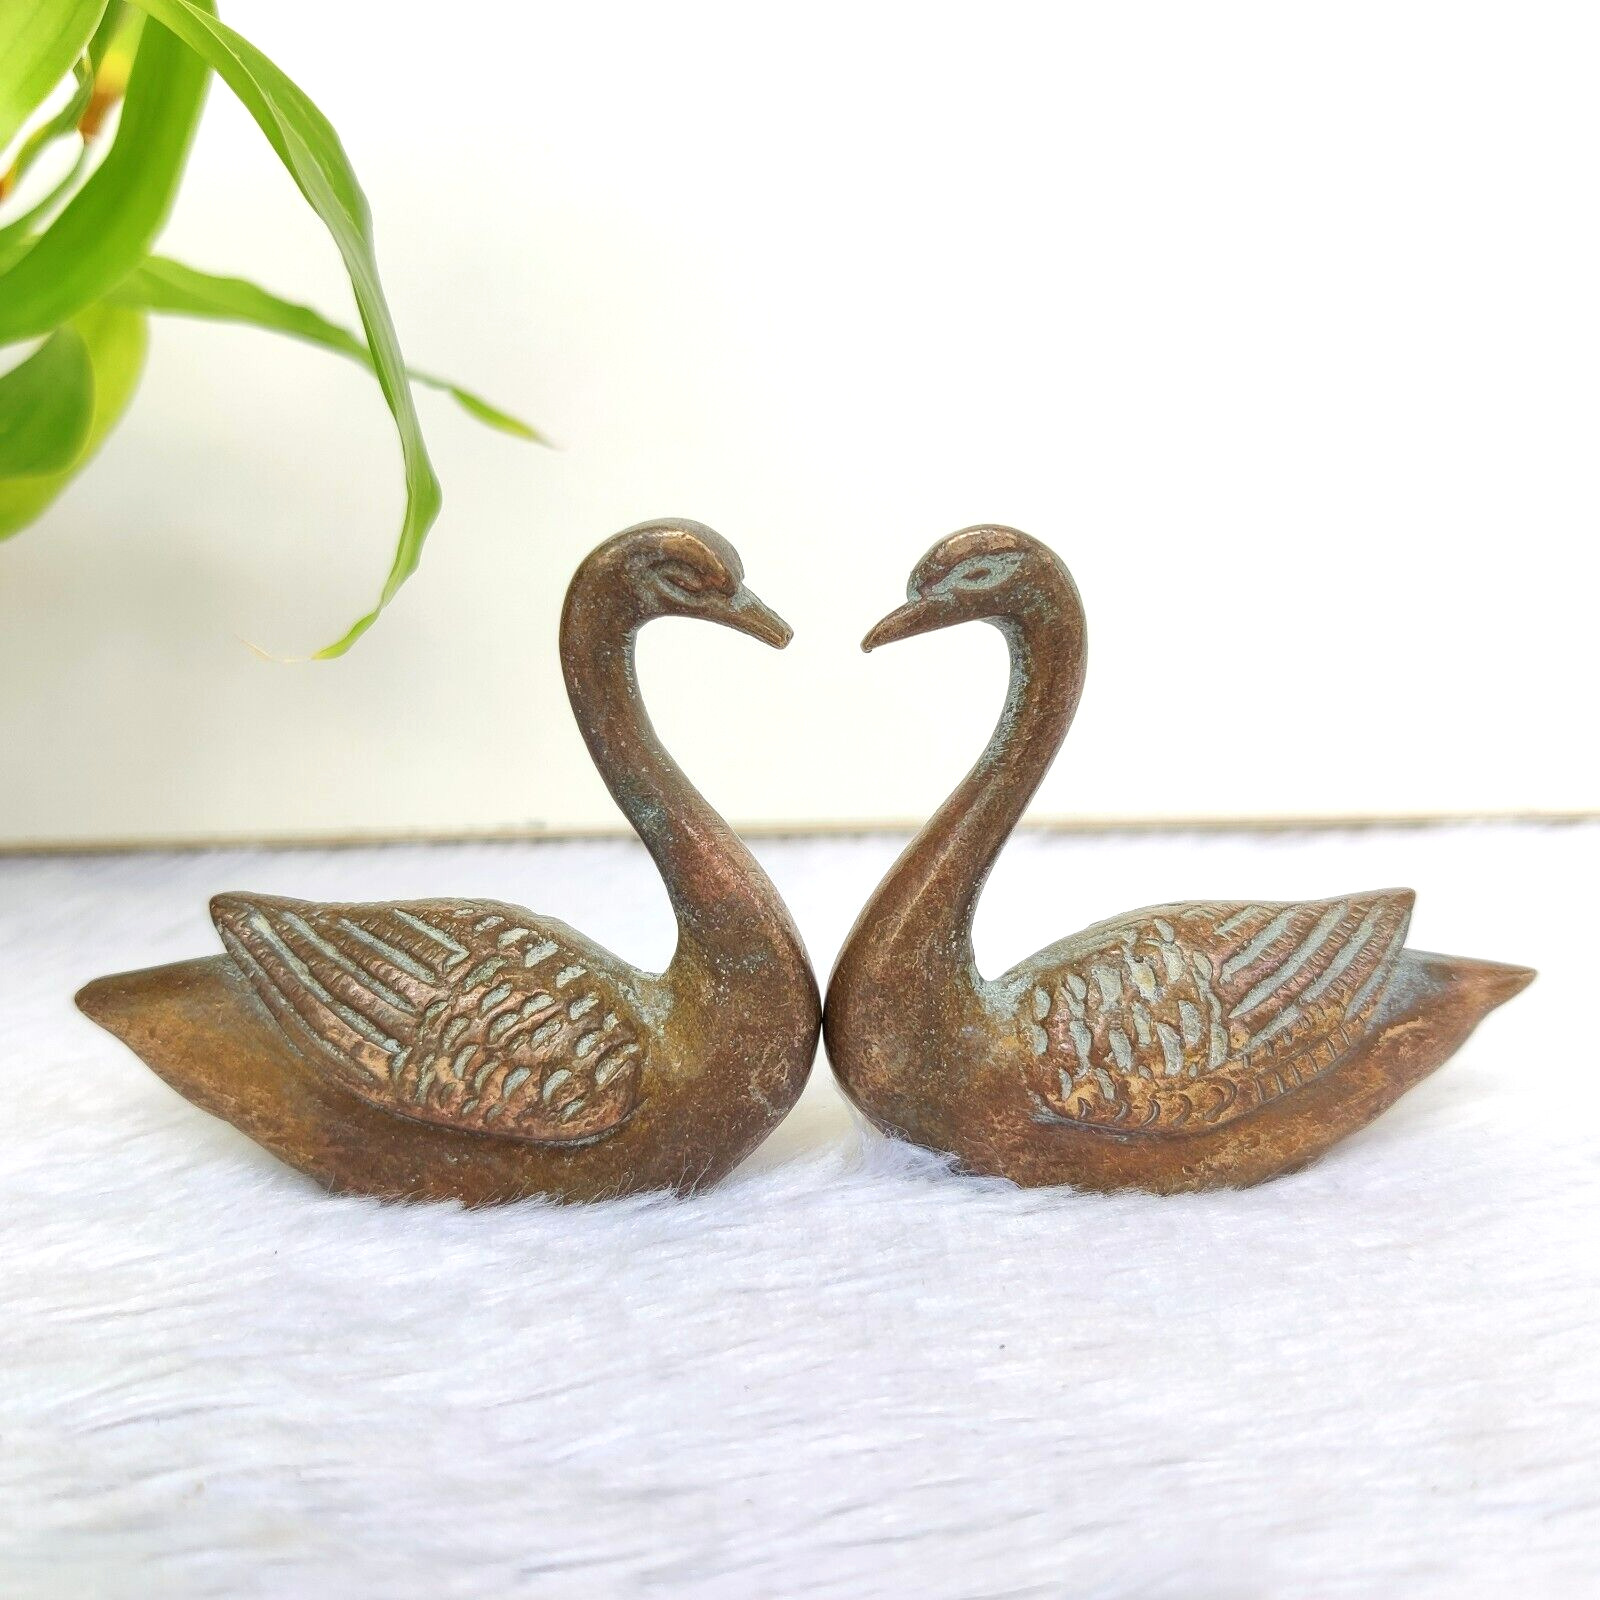 Vintage Old Handcrafted Brass Swan Pair Statue Figure Figurine Collectible